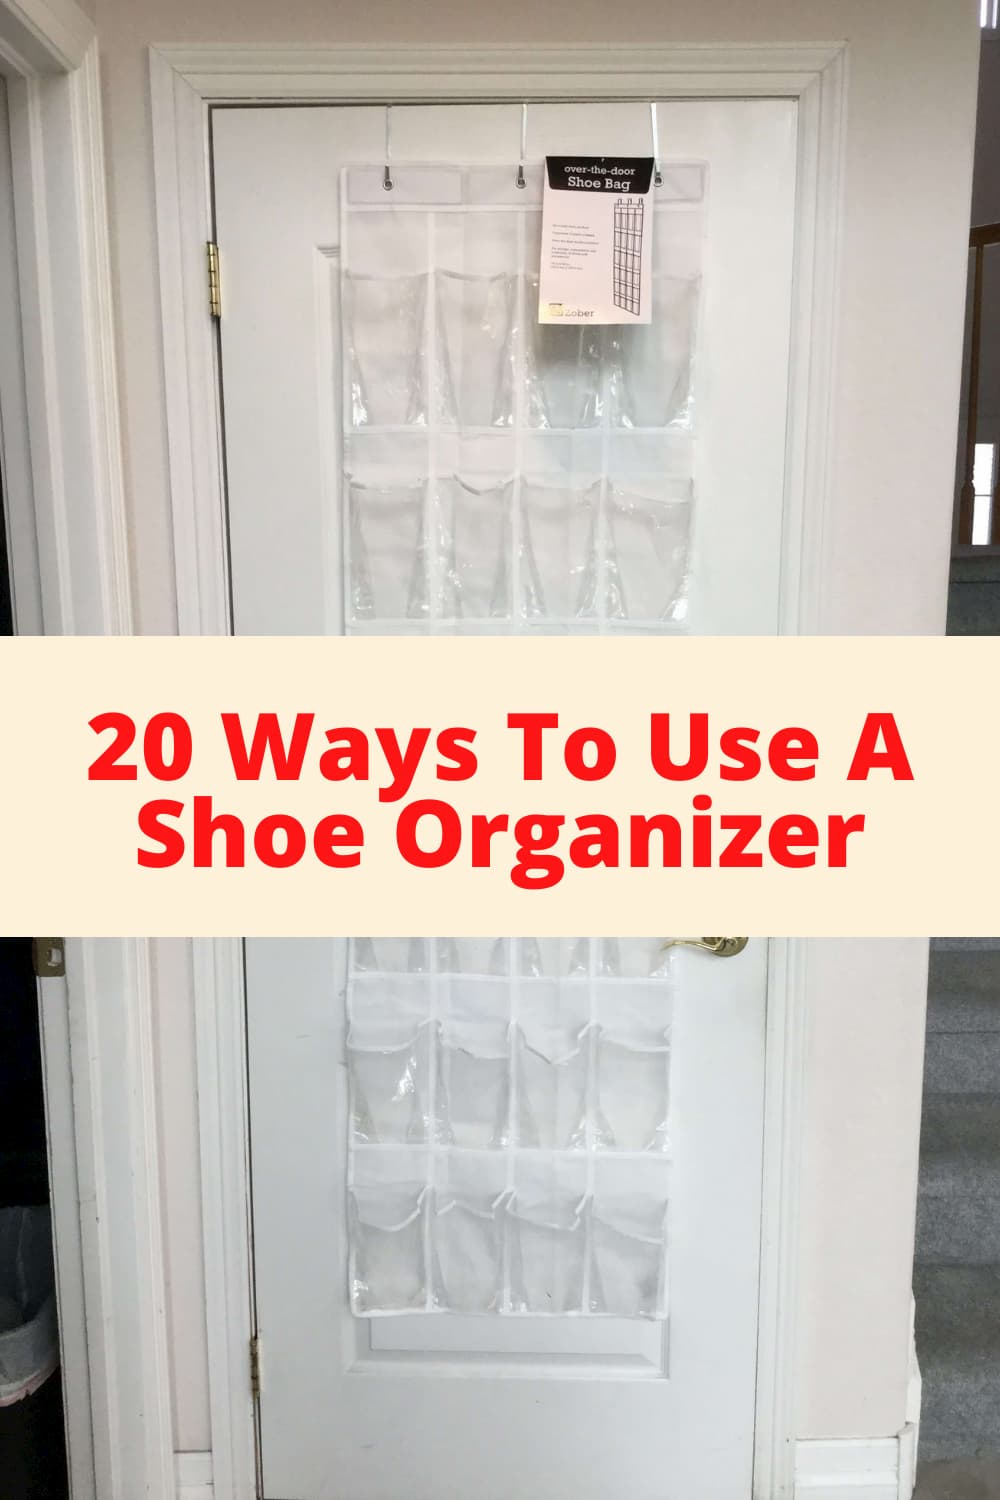 20 Easy and Unexpected Ways To Use A Hanging Shoe Organizer